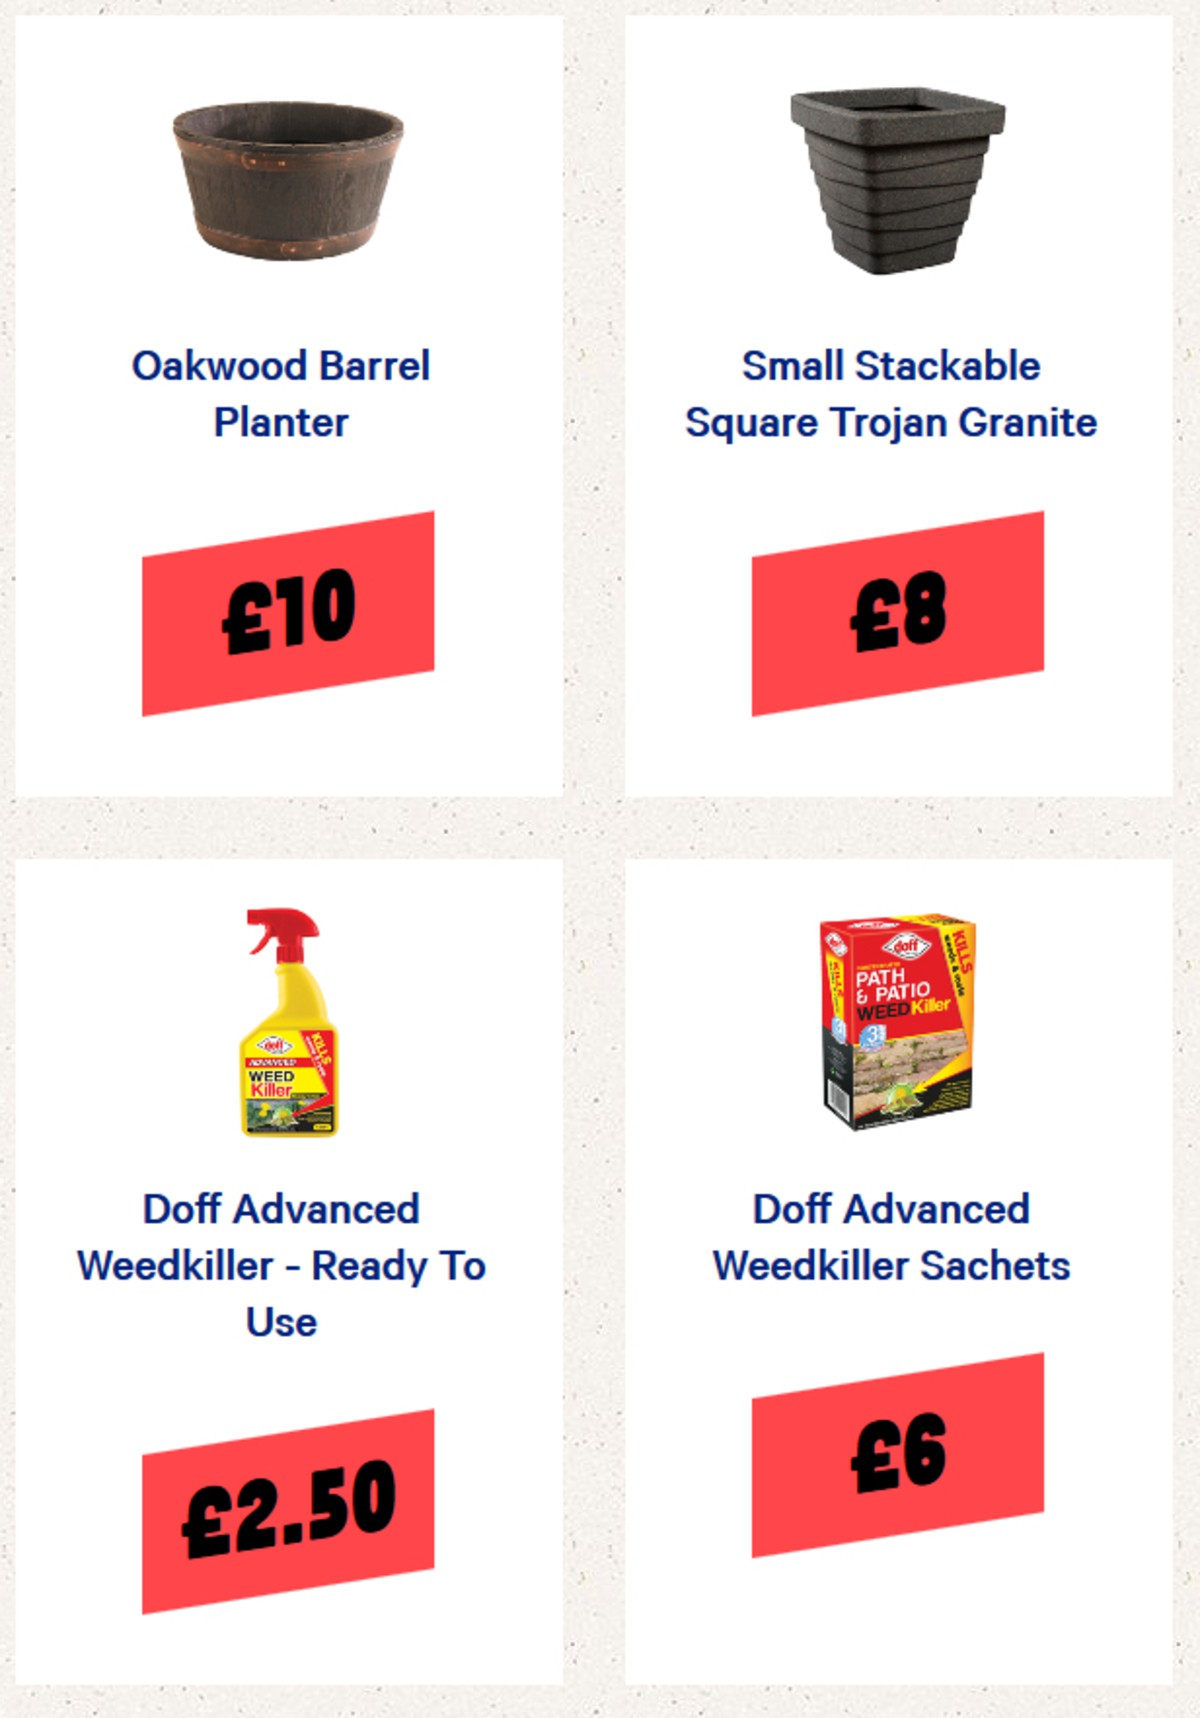 Jack's Offers from 10 April